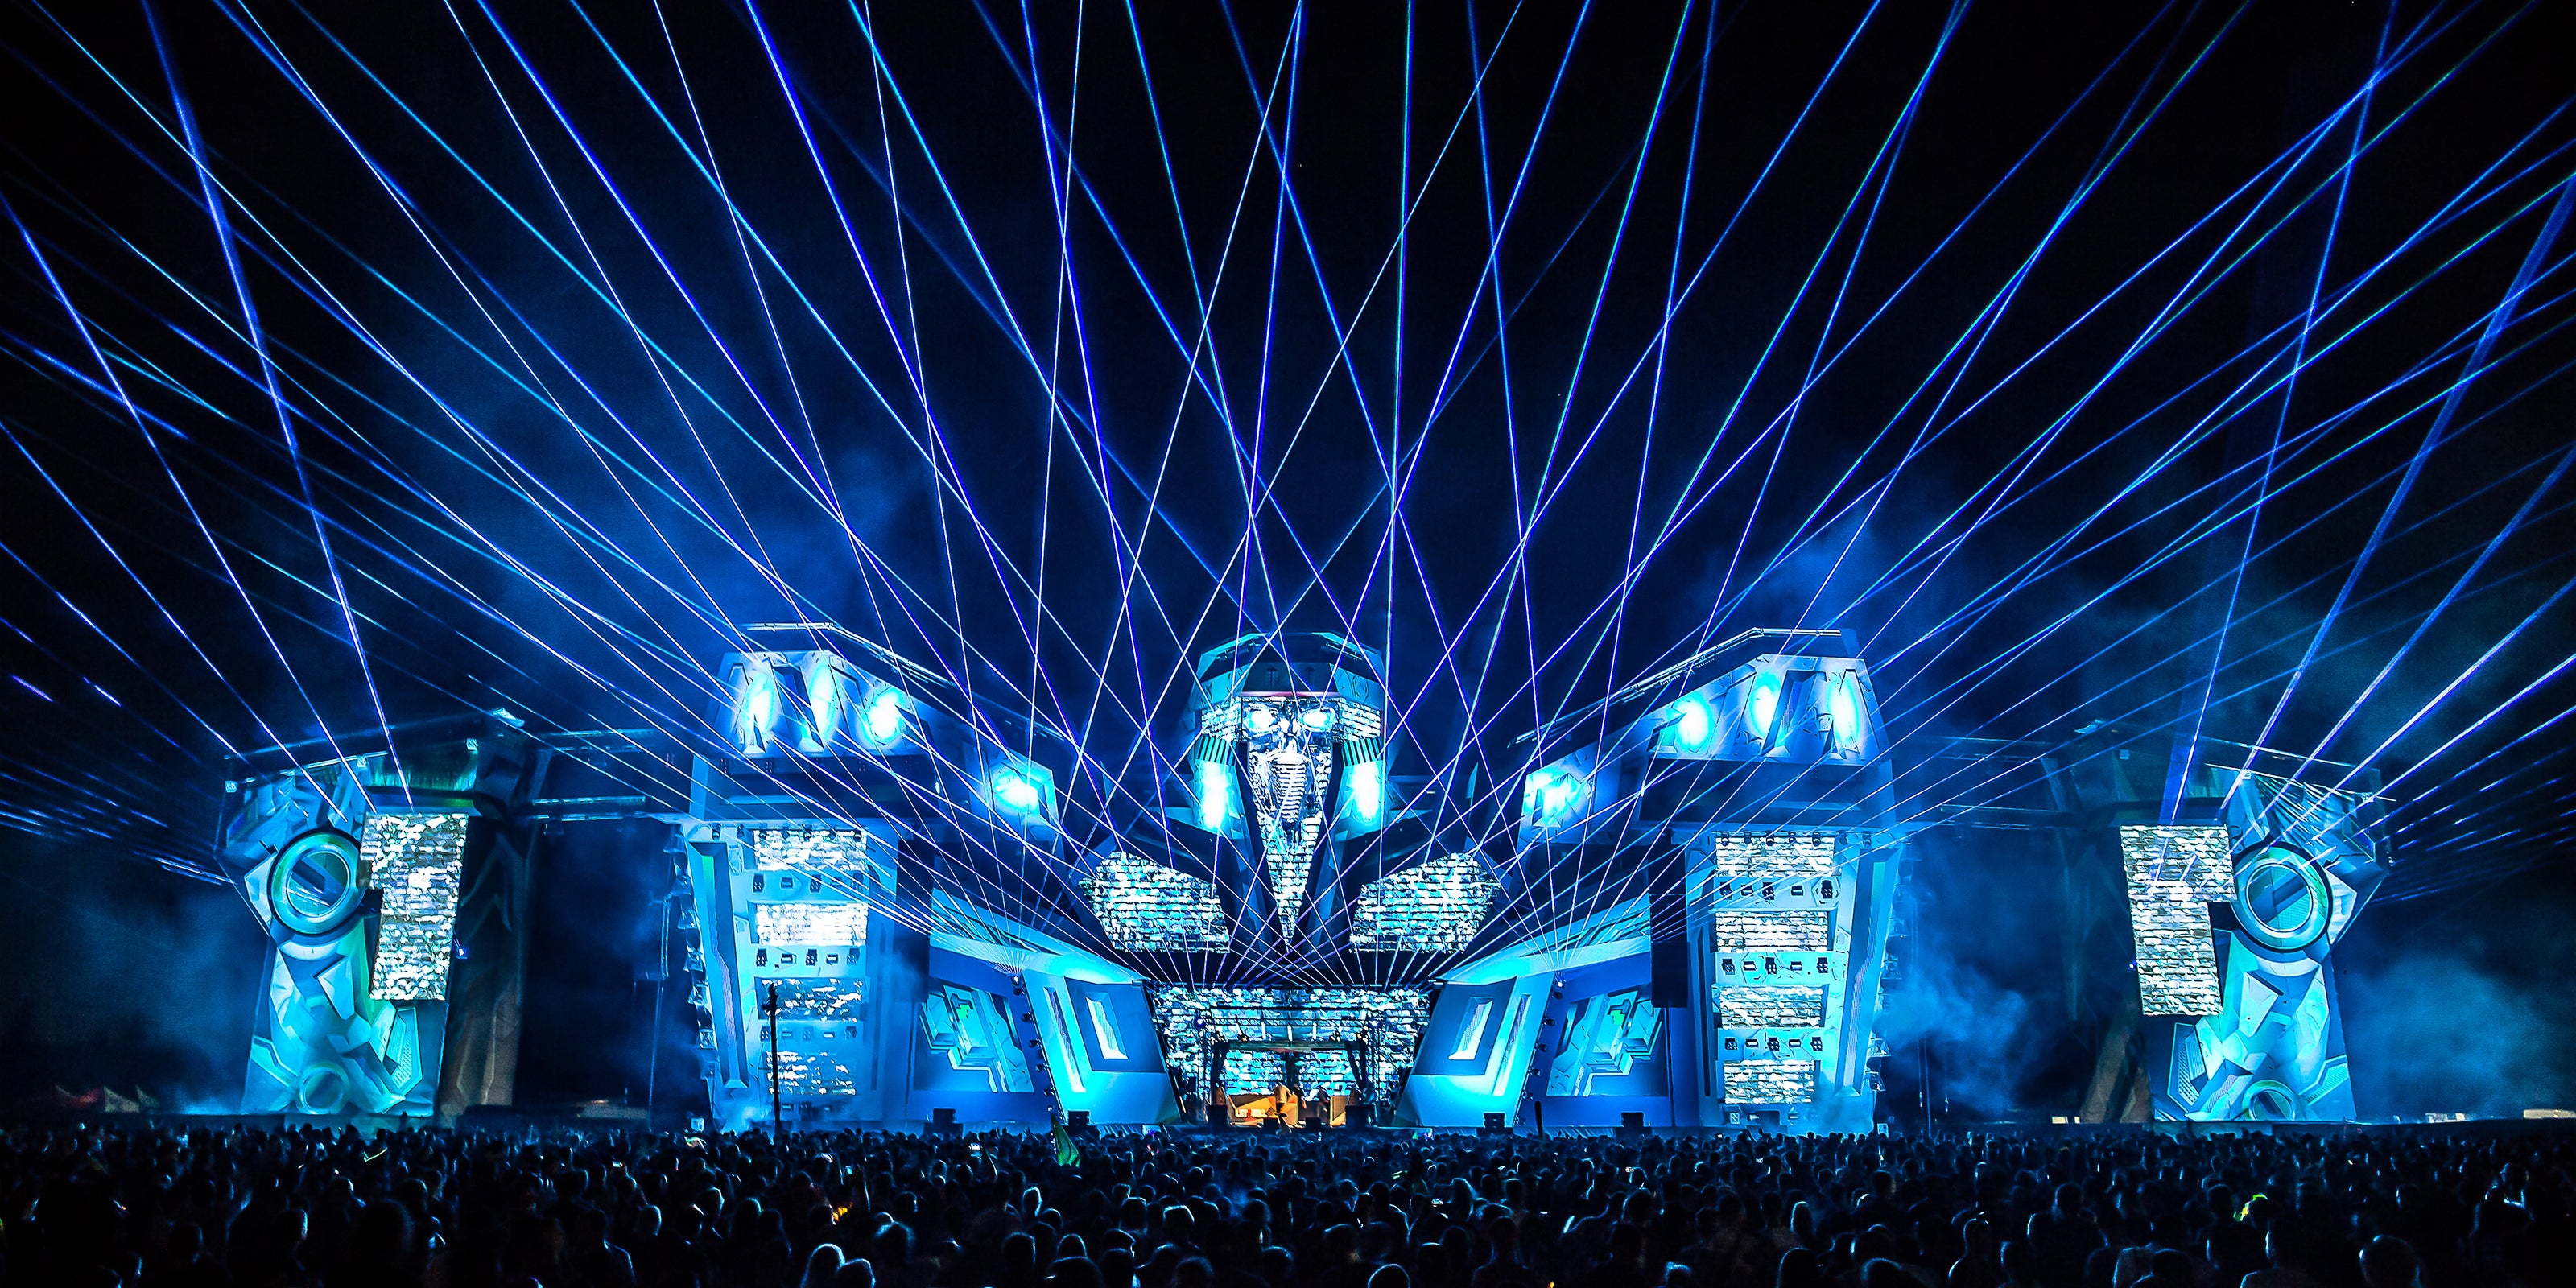 LASERS FOR FESTIVALS, OUTDOOR ARENAS AND FIREWORKS